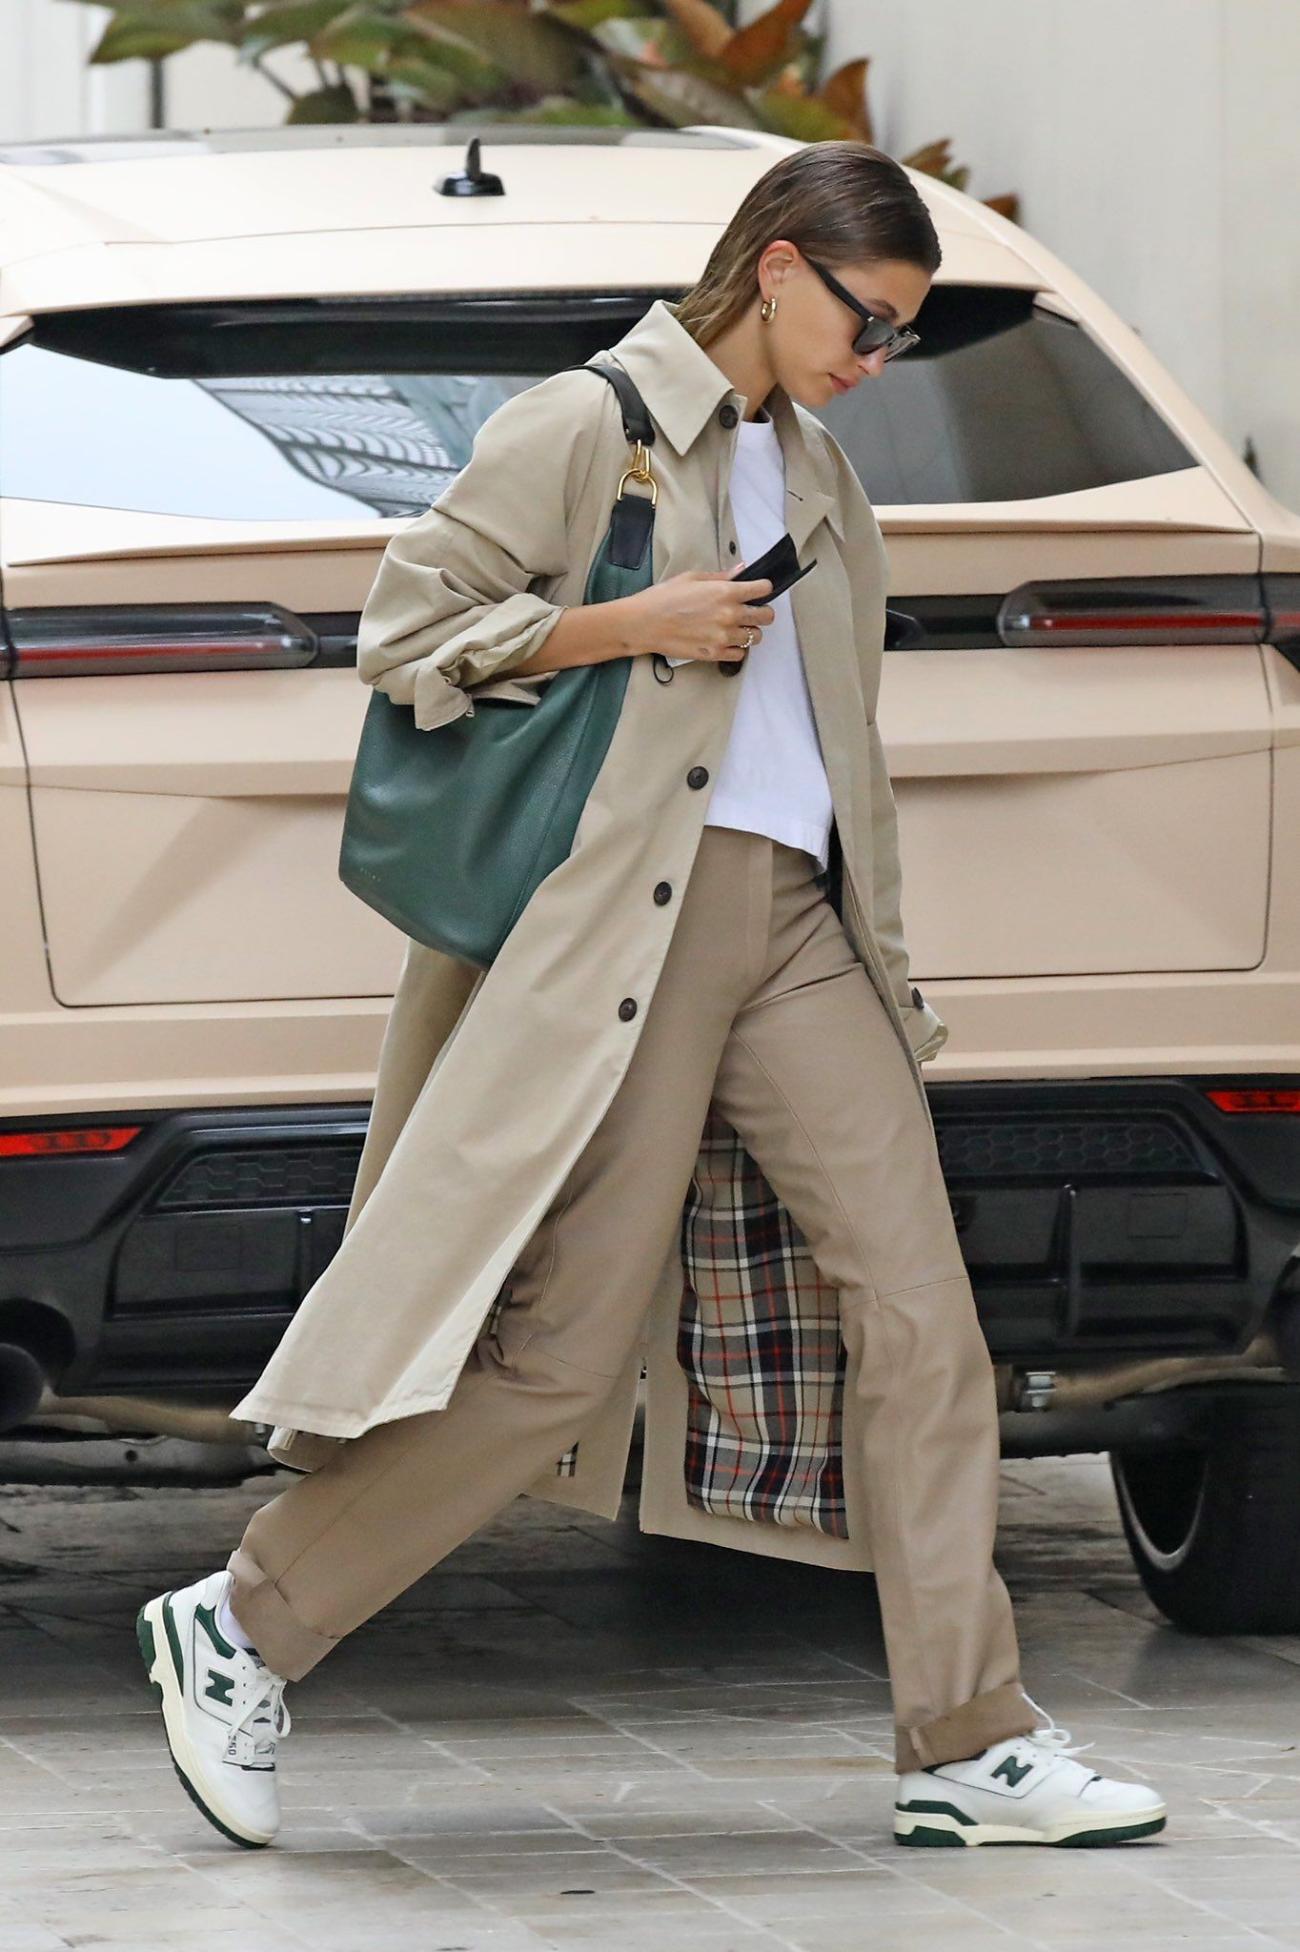 Celebrity Style Neutral Beige Trench Coat & Trousers, Basic White T-Shirt, New Balance 550 White & Team Forest Green Sneakers Outfit